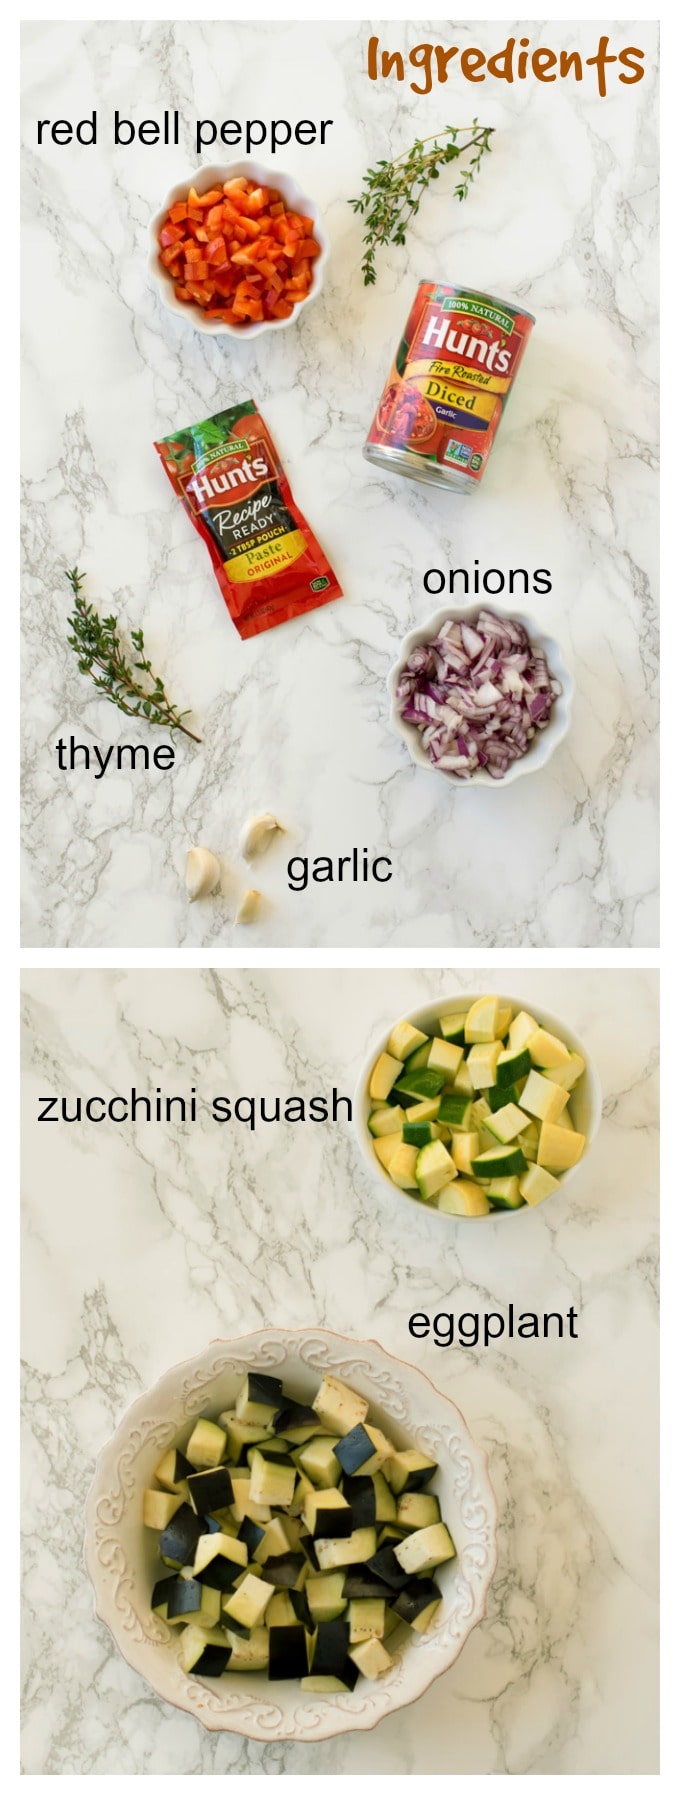 ingredients-for-sauce